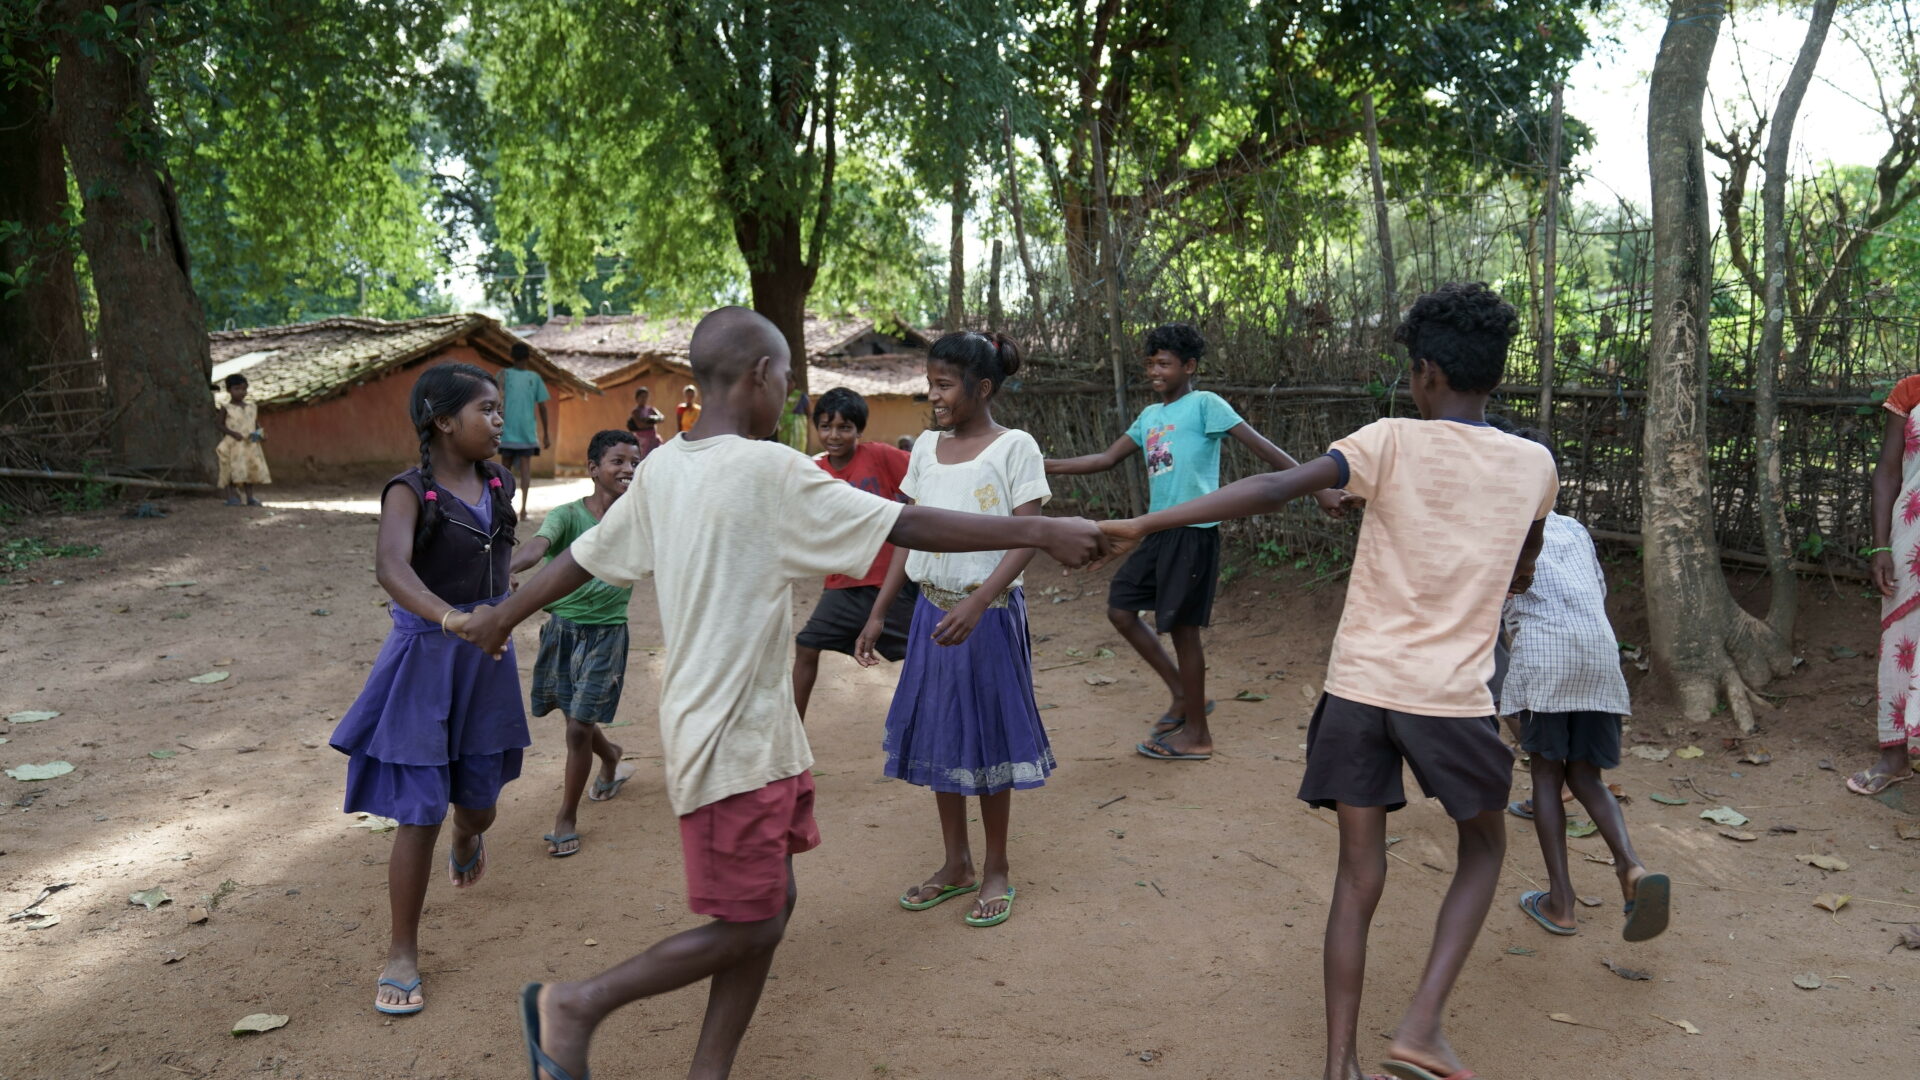 8 young Indian children play Ring a roses in a rural village setting